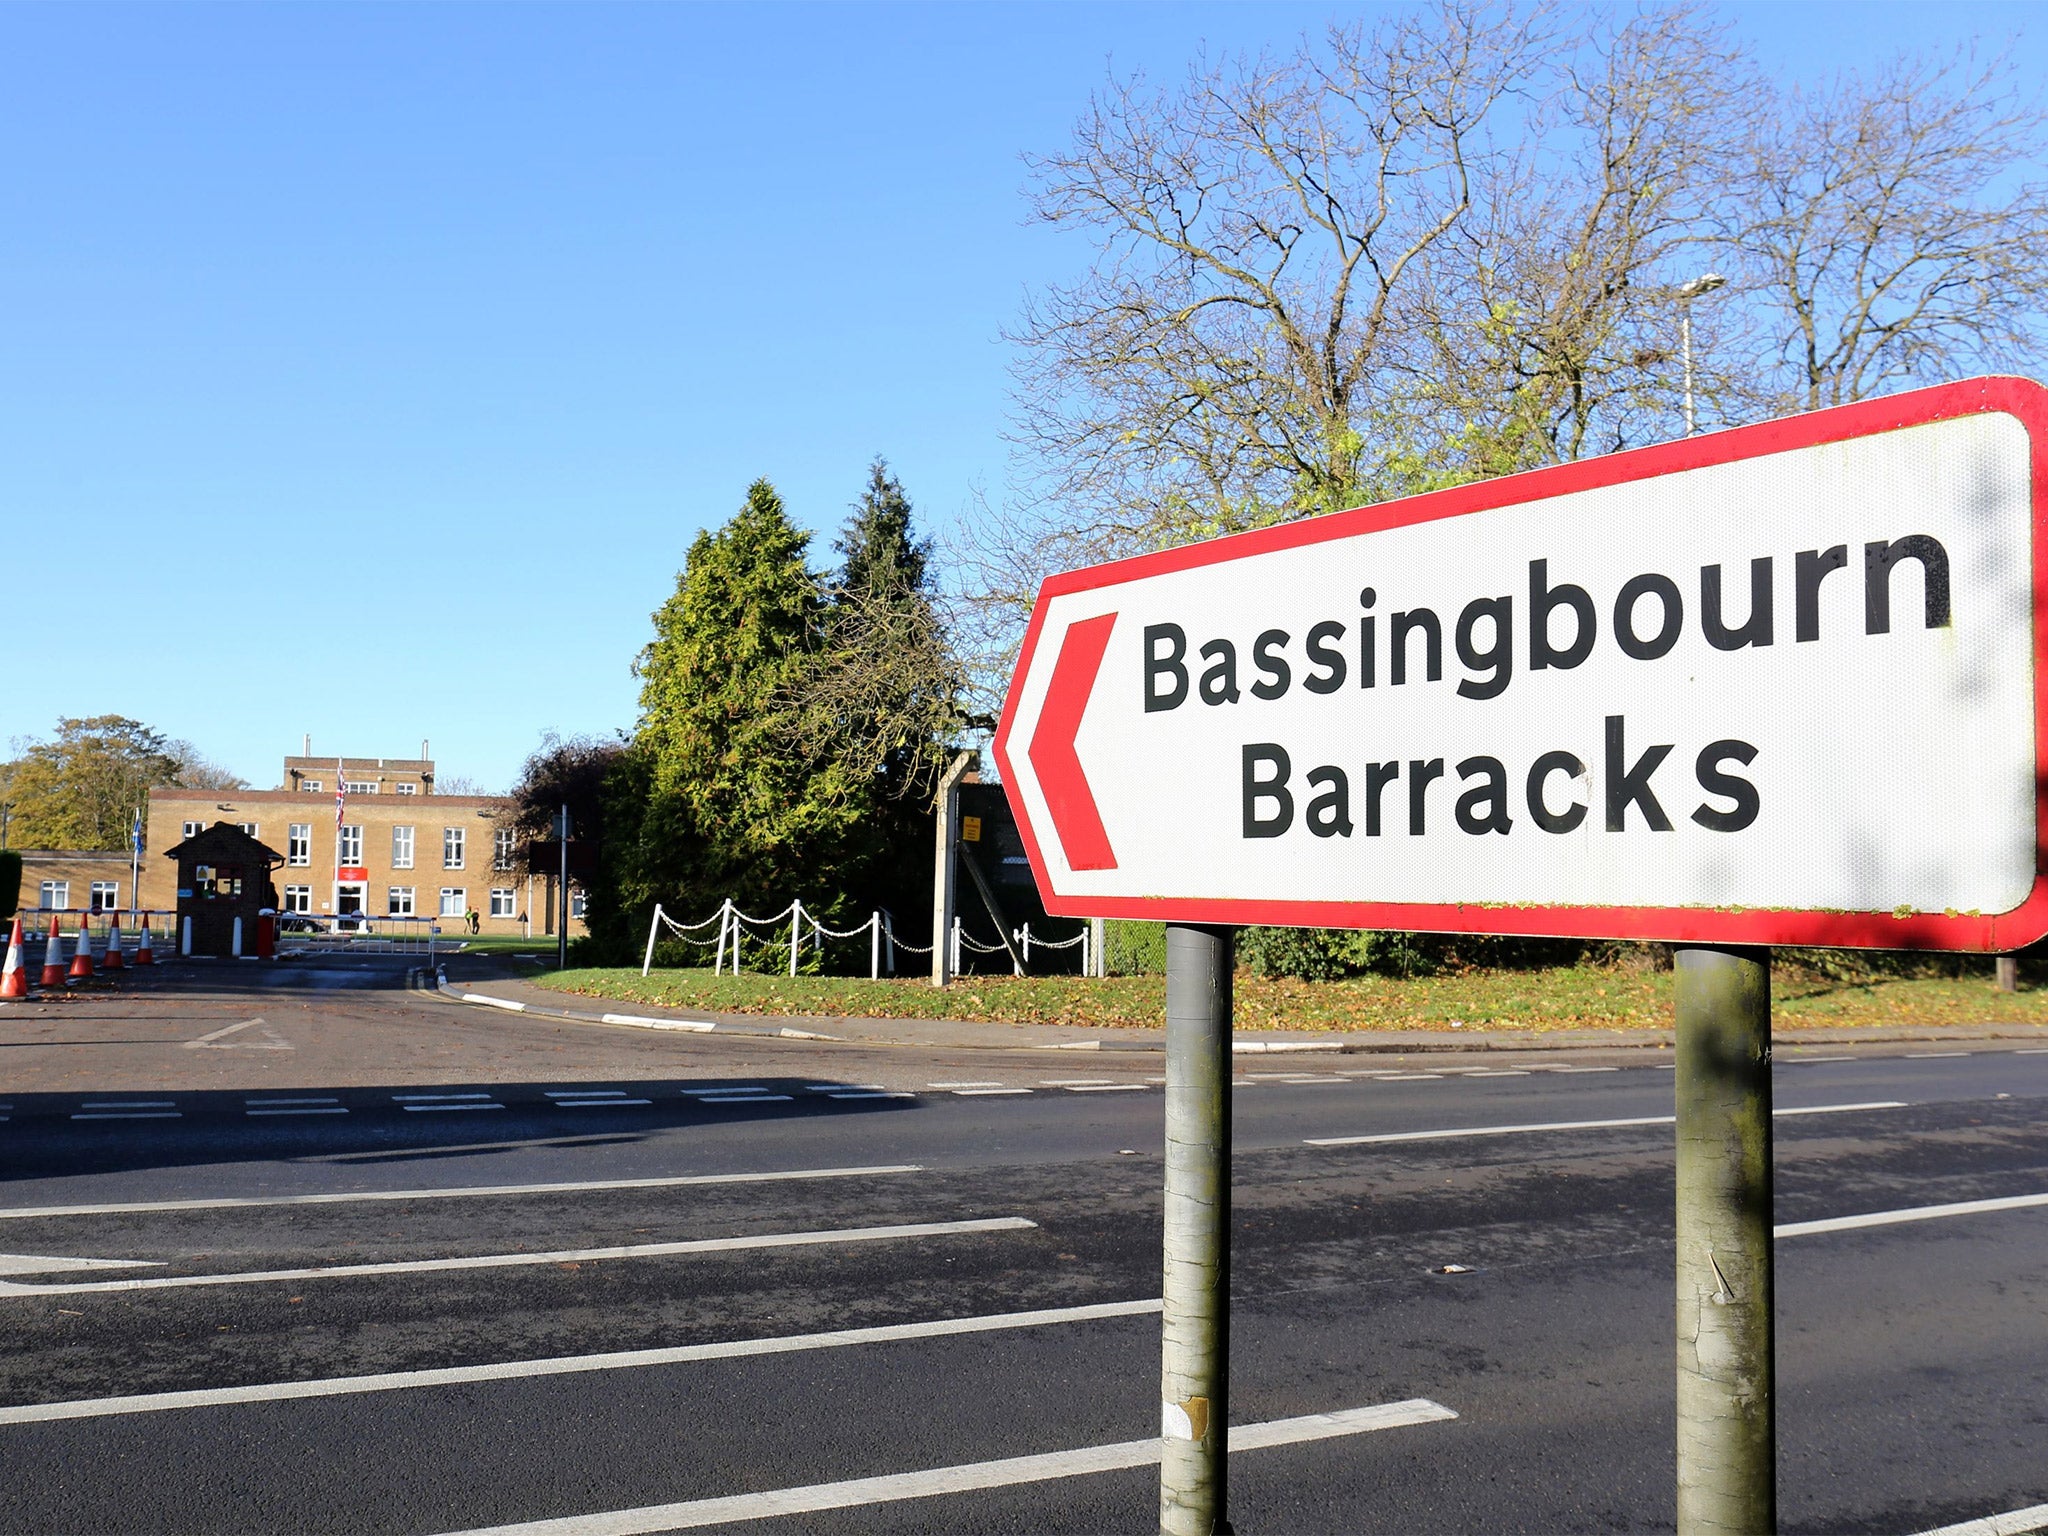 Bassingbourne Barracks in Cambridgeshire where the soldiers were based at the time of the attacks